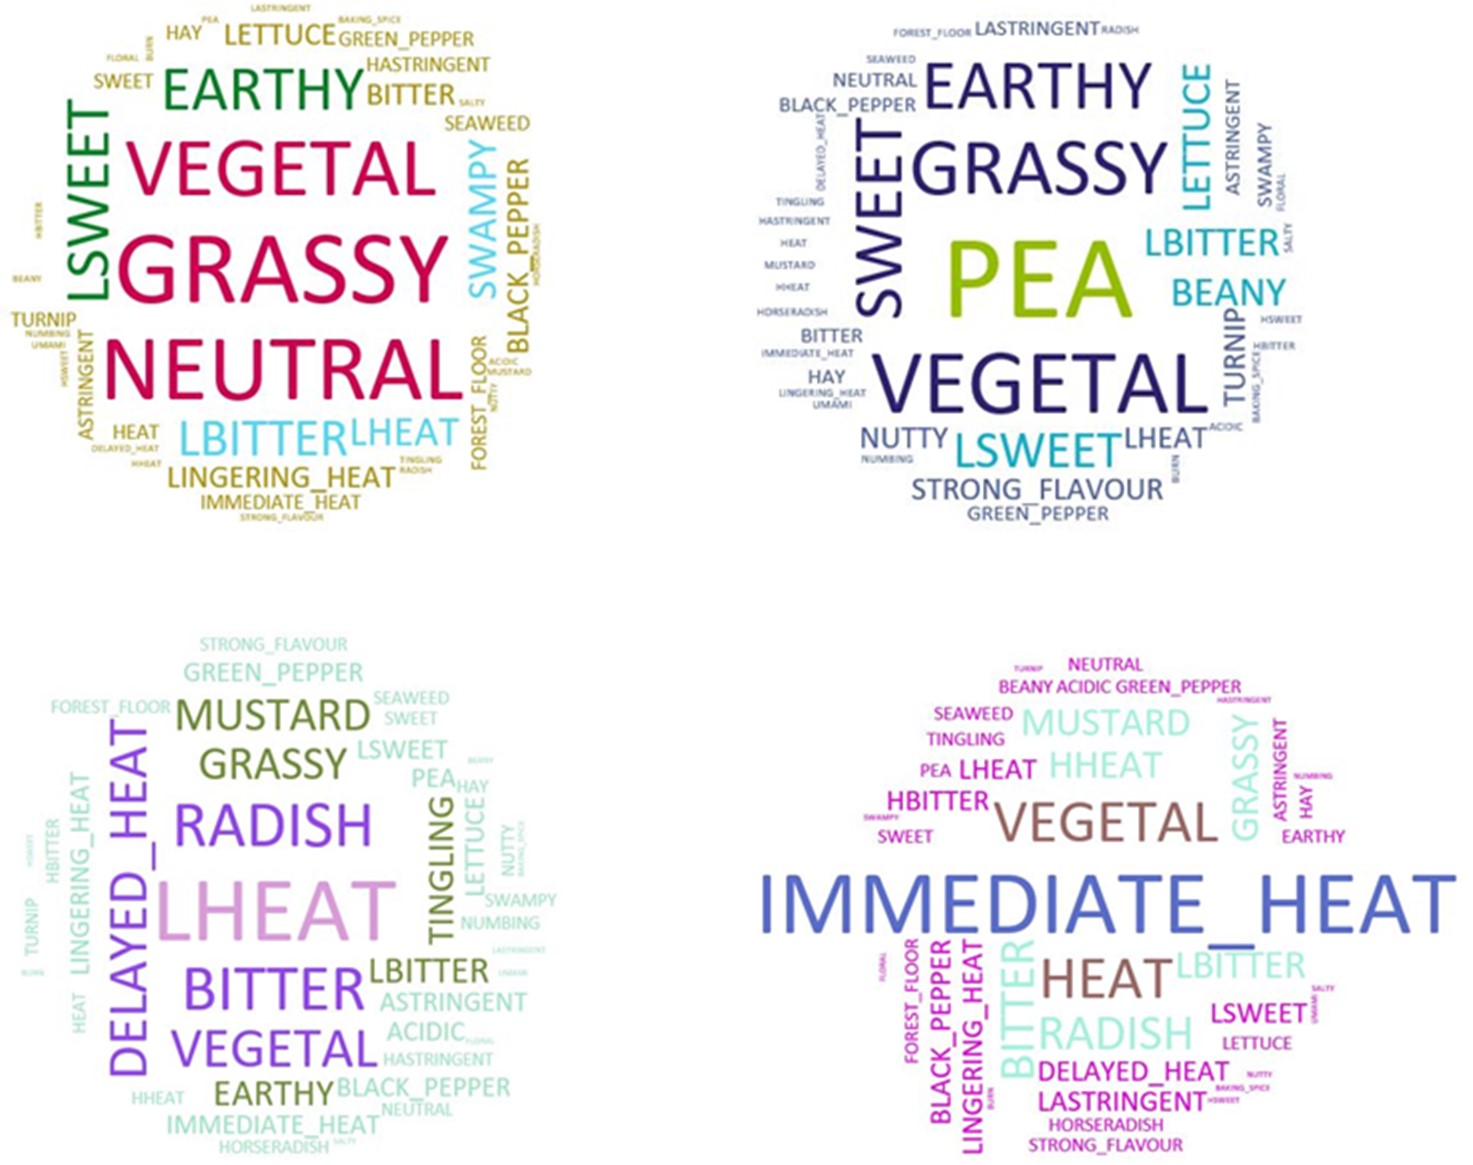 Fig 2. Word clouds of the panelists’ descriptions of the four representative samples. The larger the text, the more times that term was used to describe the sample. From left to right, top to bottom: micro broccoli, pea shoots, micro mustard and micro arugula.